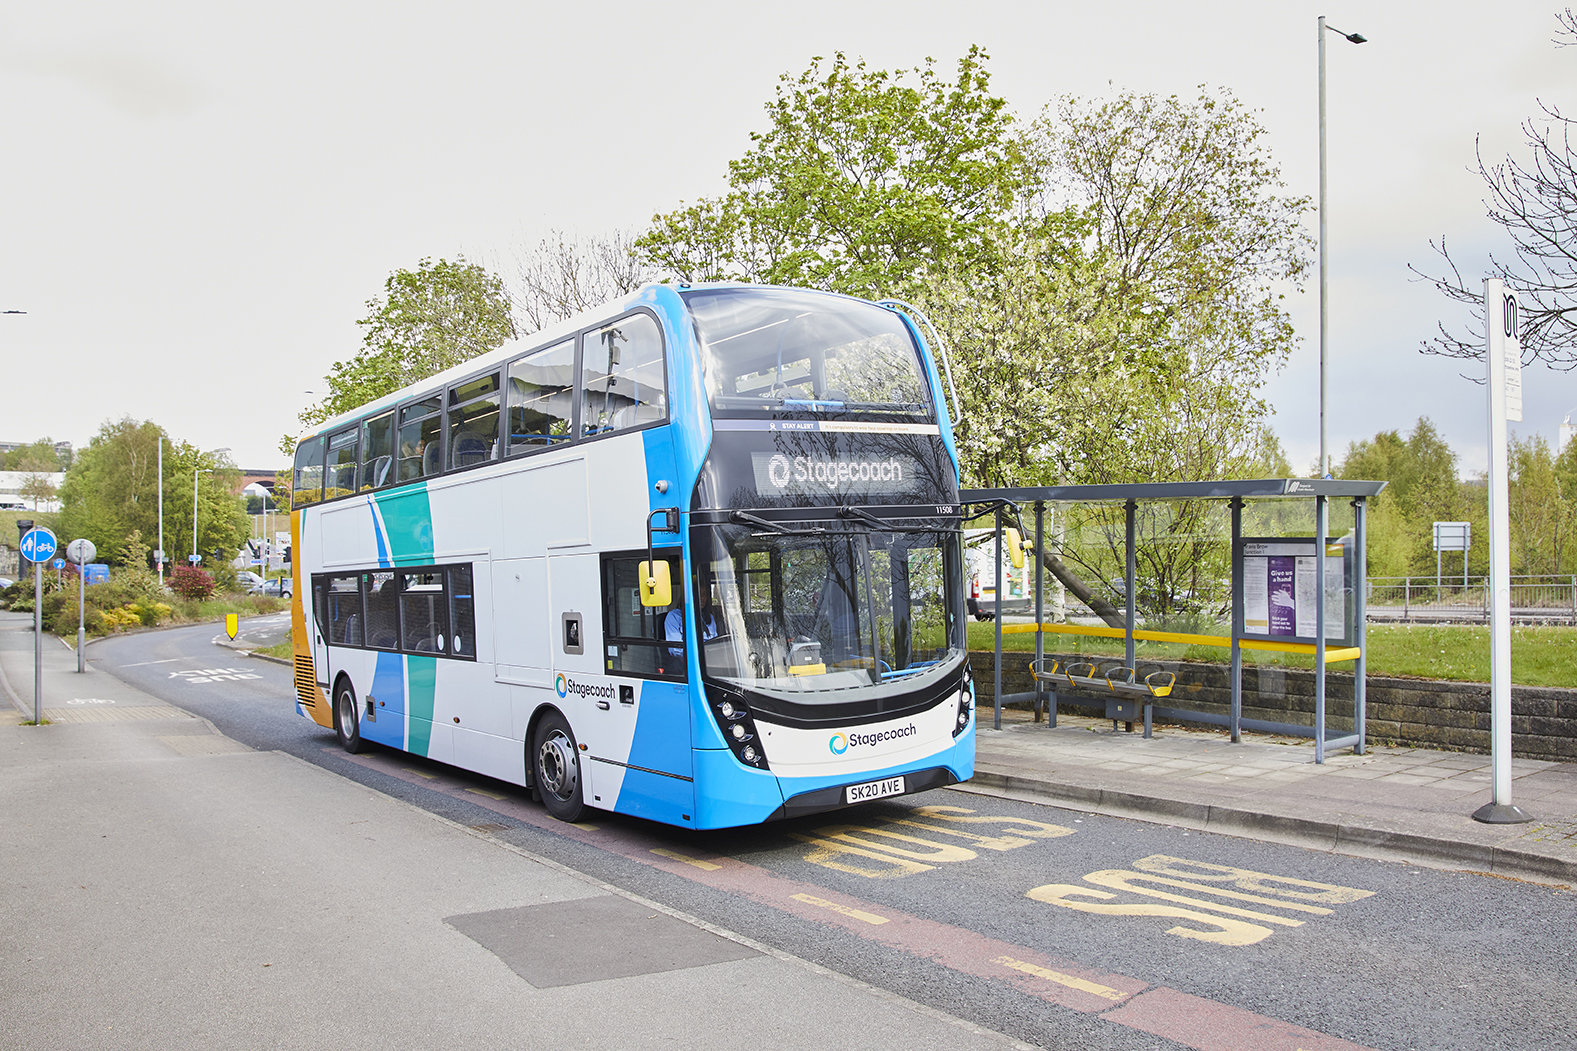 These are the major timetable changes to Stagecoach bus services in